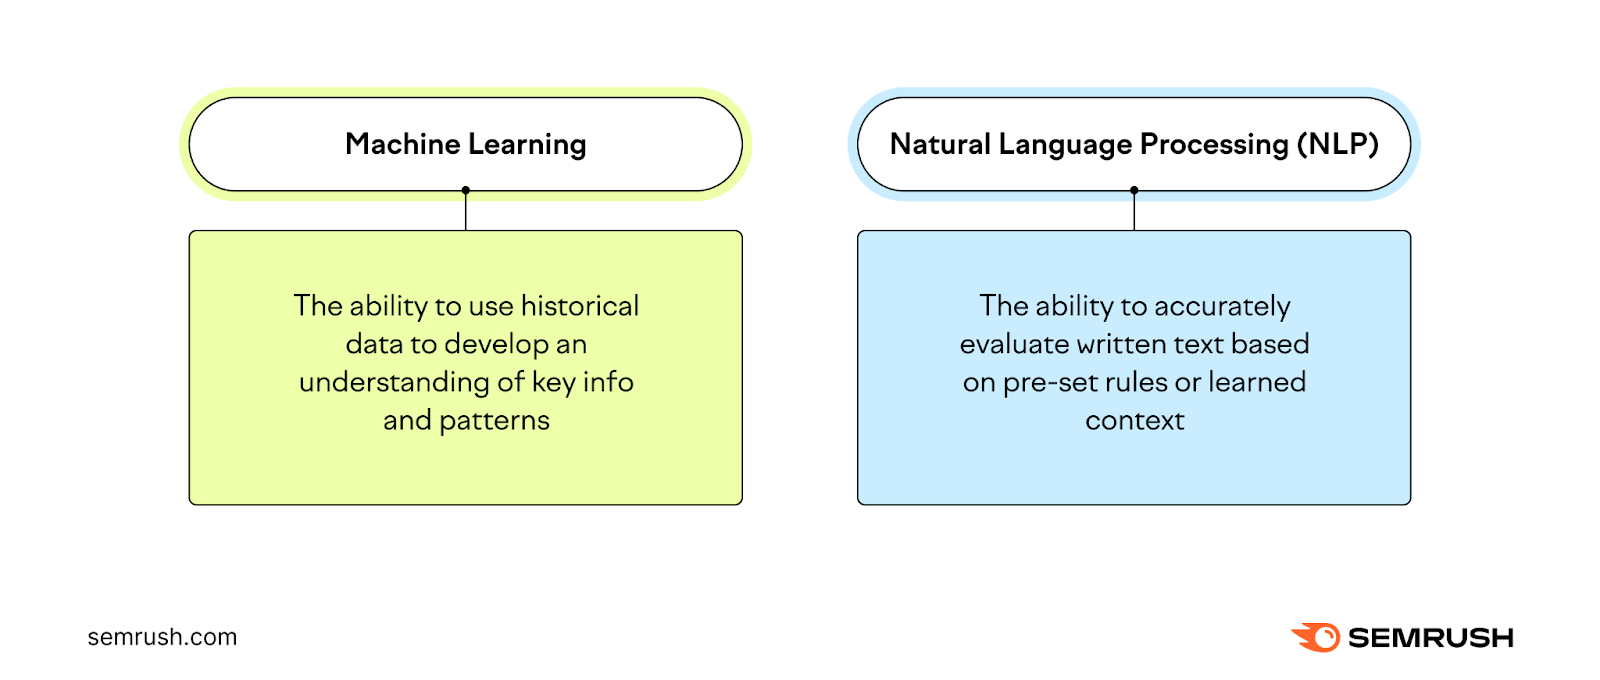 Definitions of machine learning and natural language processing (NLP)